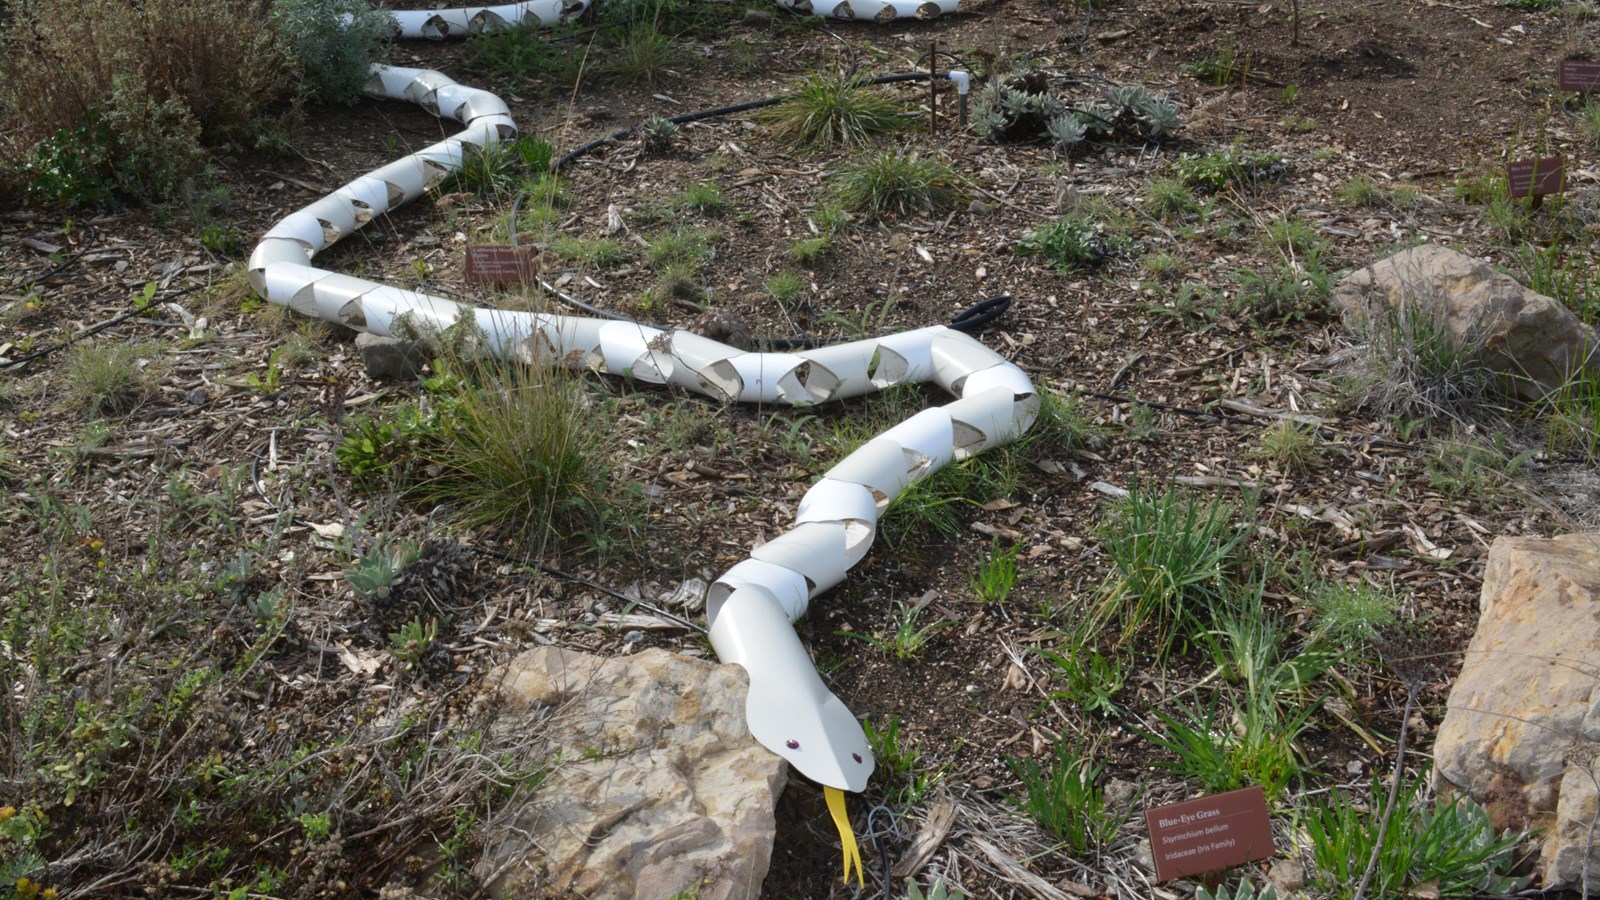 This 22-foot-long sculpture of the Santa Cruz island gopher snake is like a long, white paper chain.